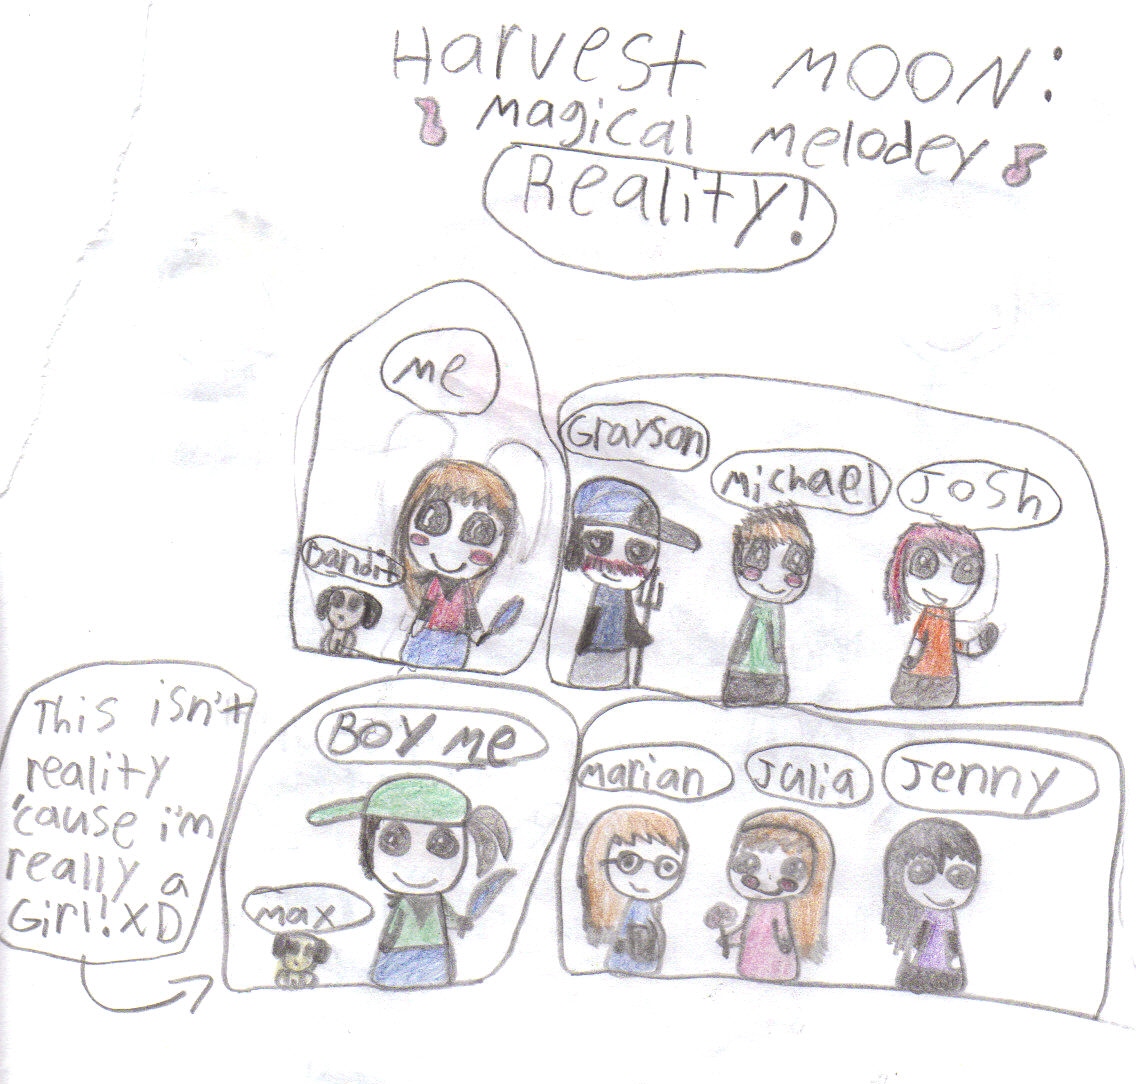 harvest moon : magical melodey reality! by Jbelle